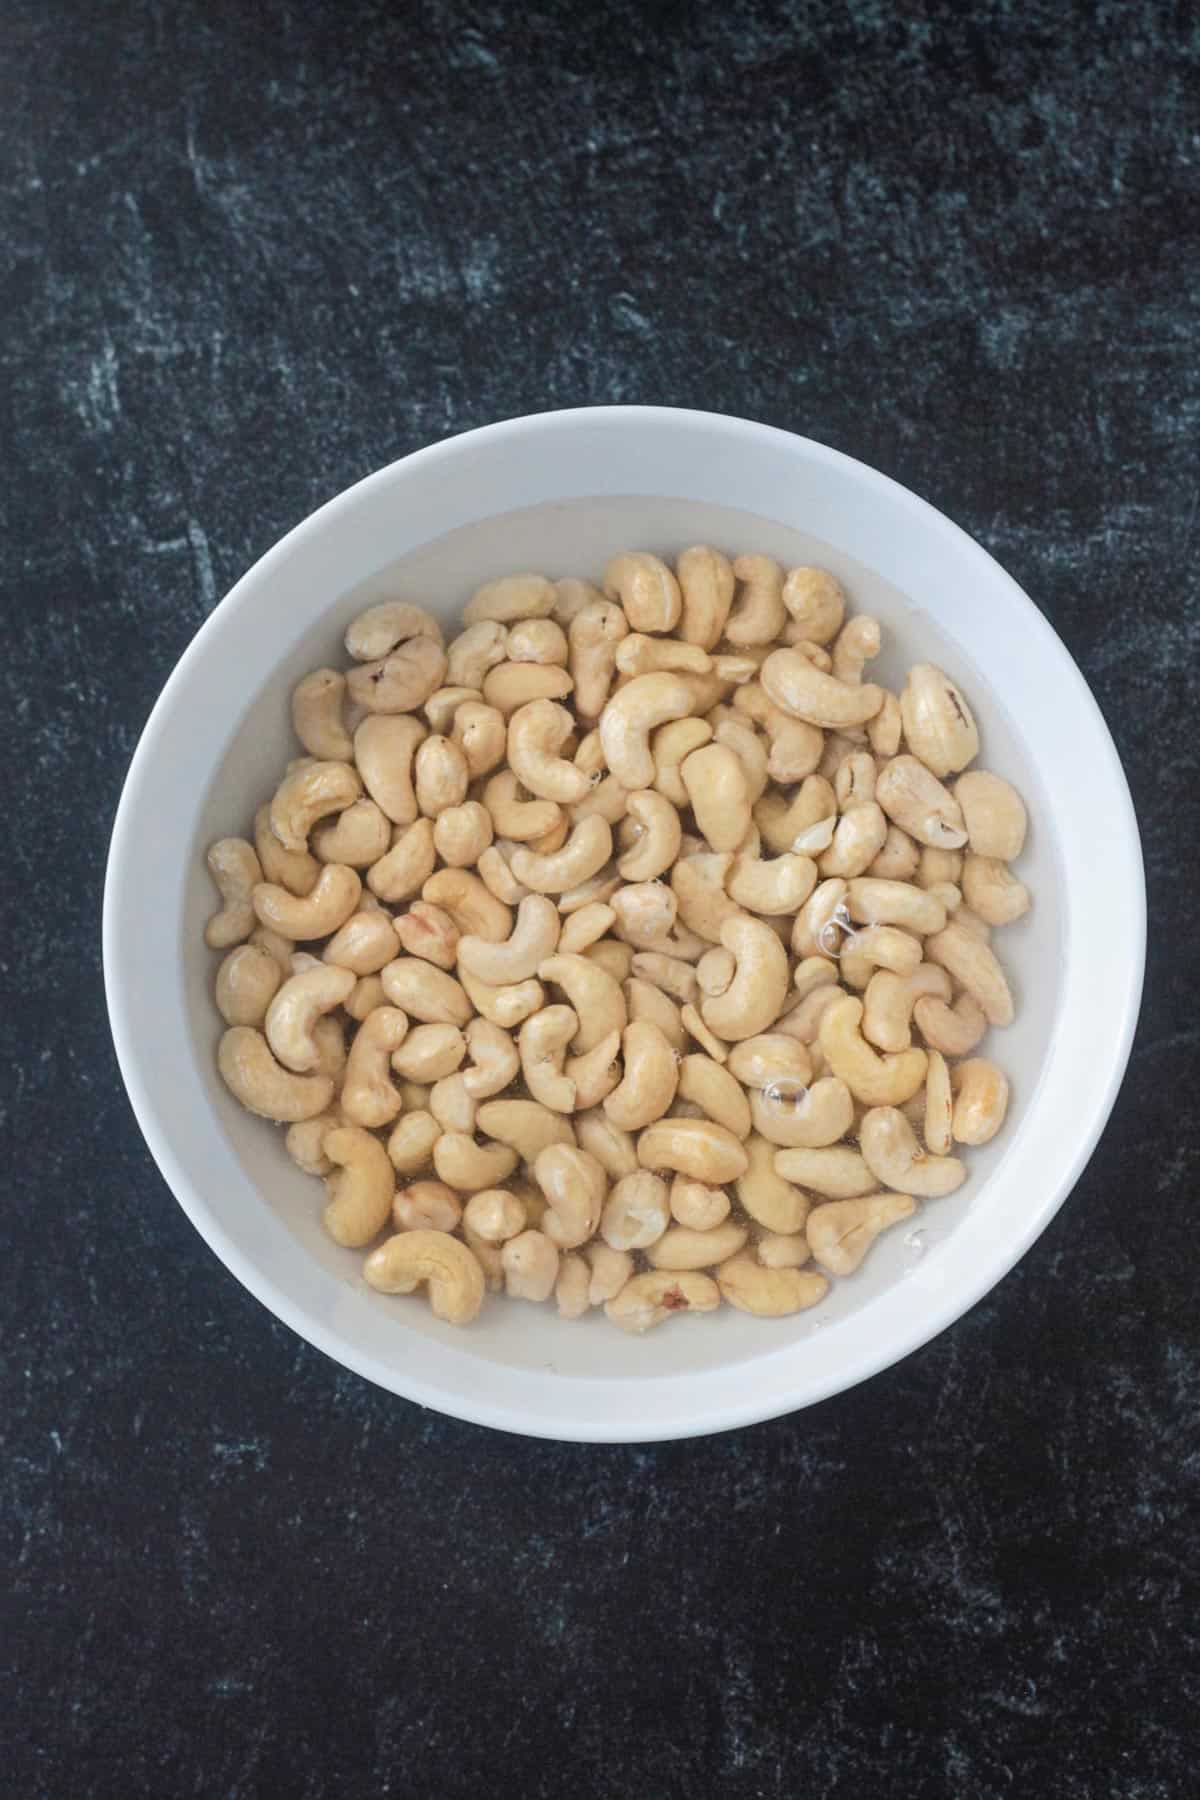 Raw cashews soaking in a bowl of water.